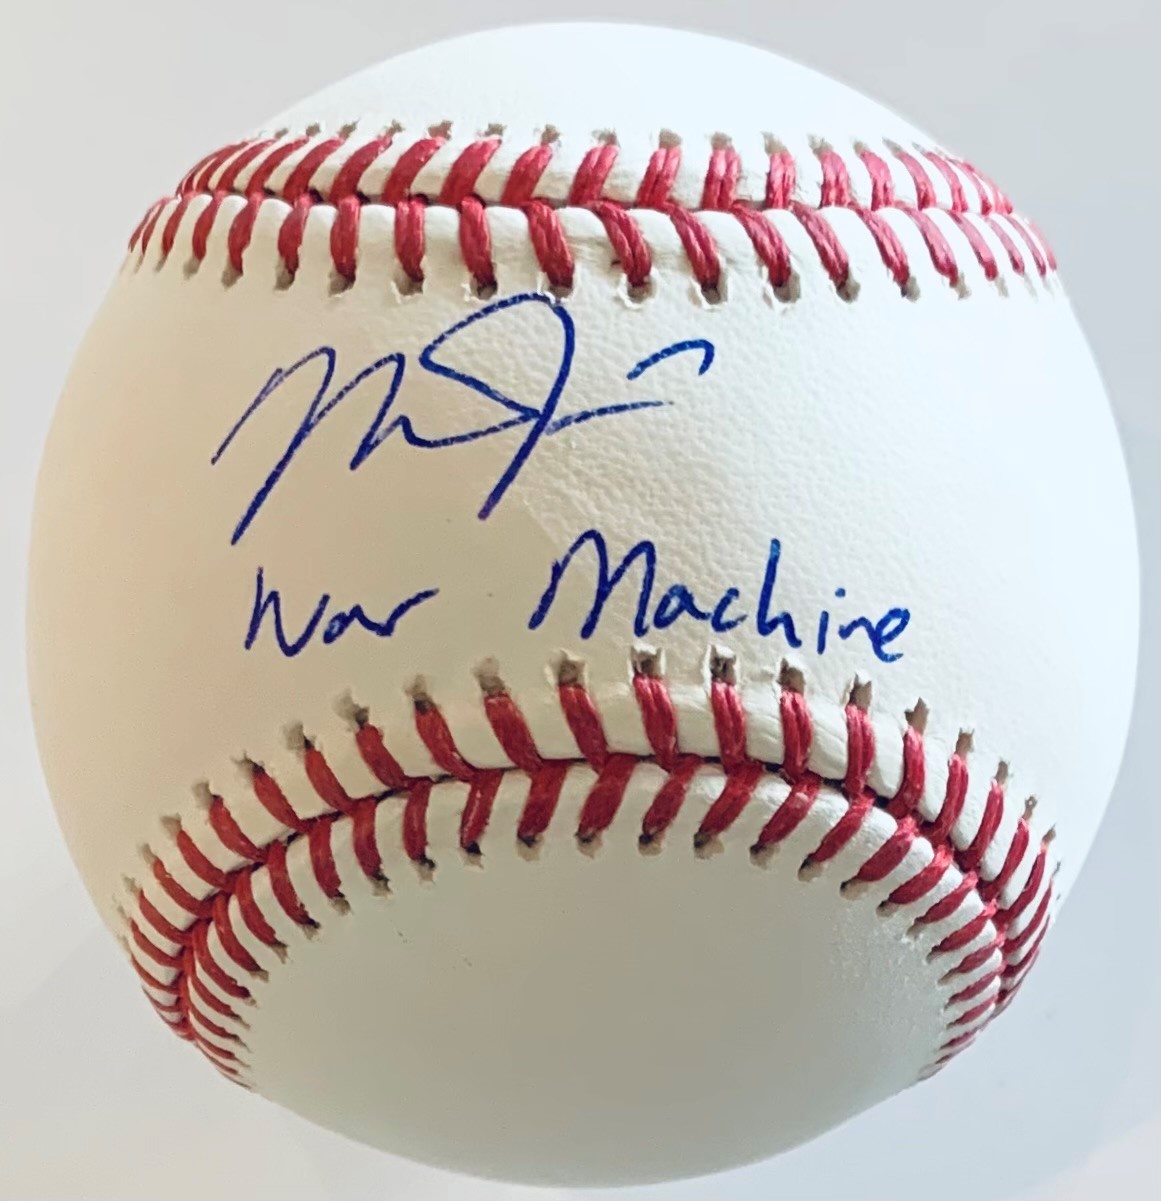 Mike Trout Signed Baseball - WAR Machine inscription - MLB holo - The  Autograph Source